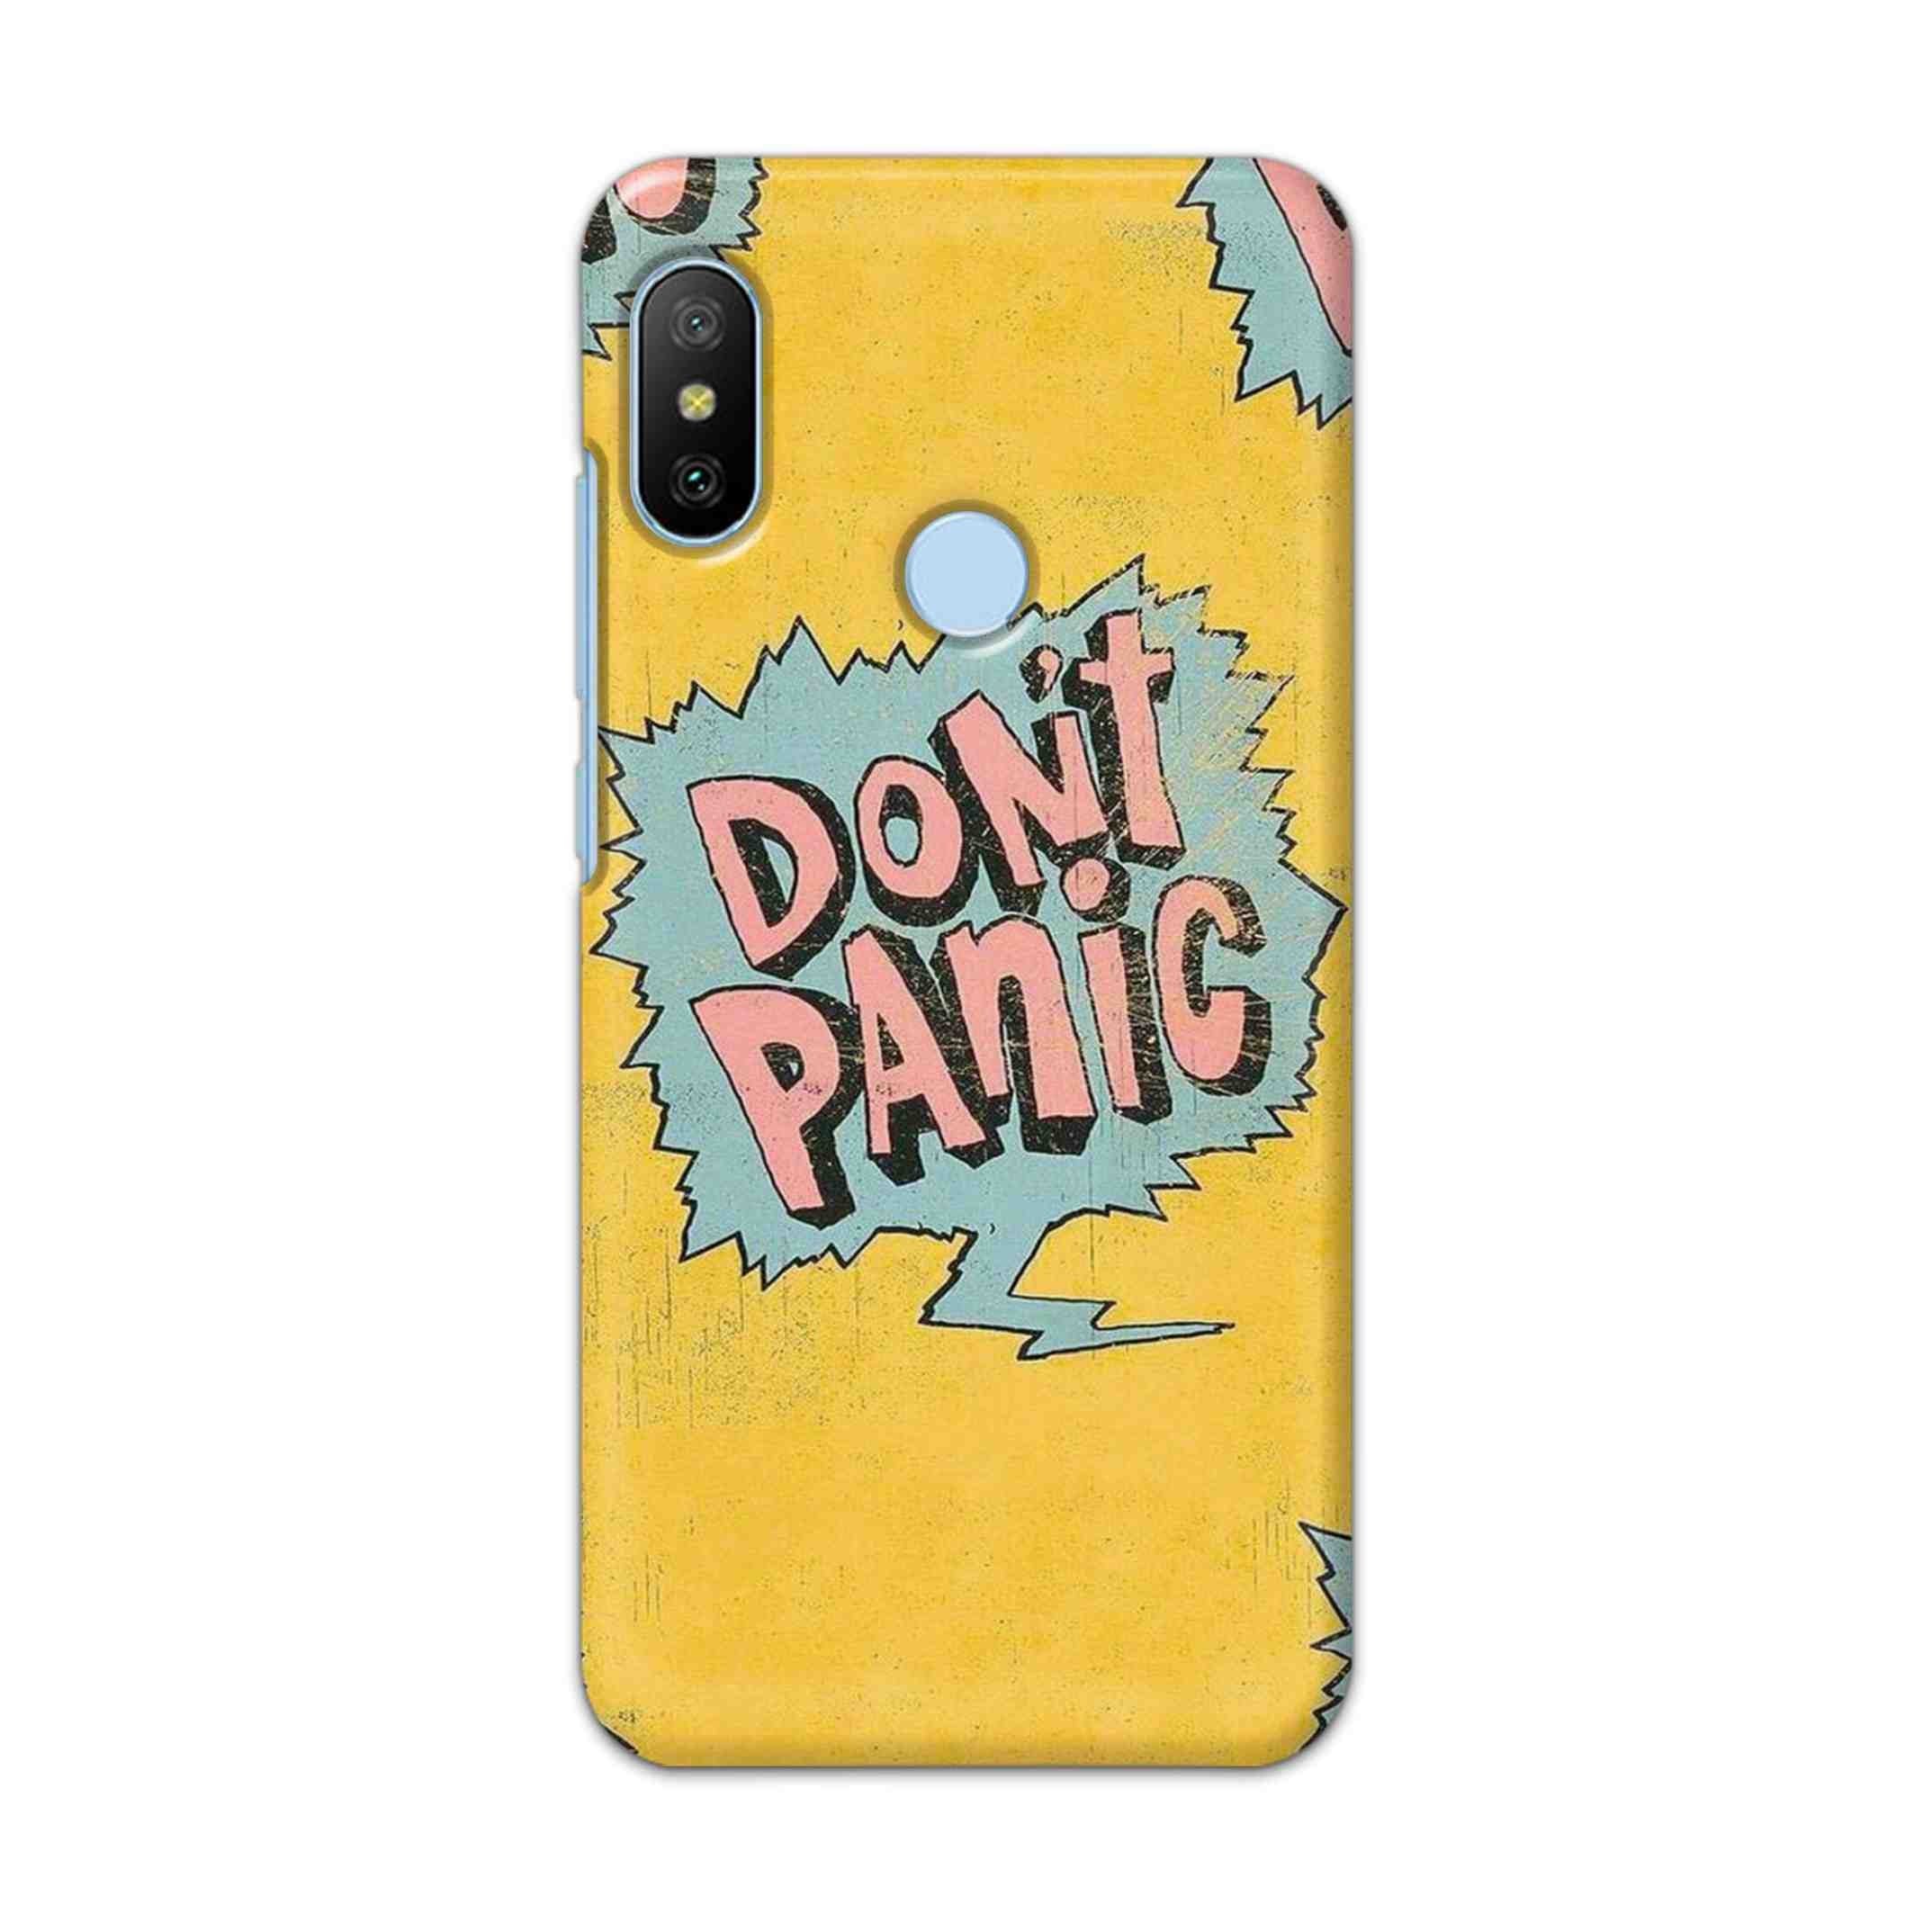 Buy Don'T Panic Hard Back Mobile Phone Case/Cover For Xiaomi Redmi 6 Pro Online